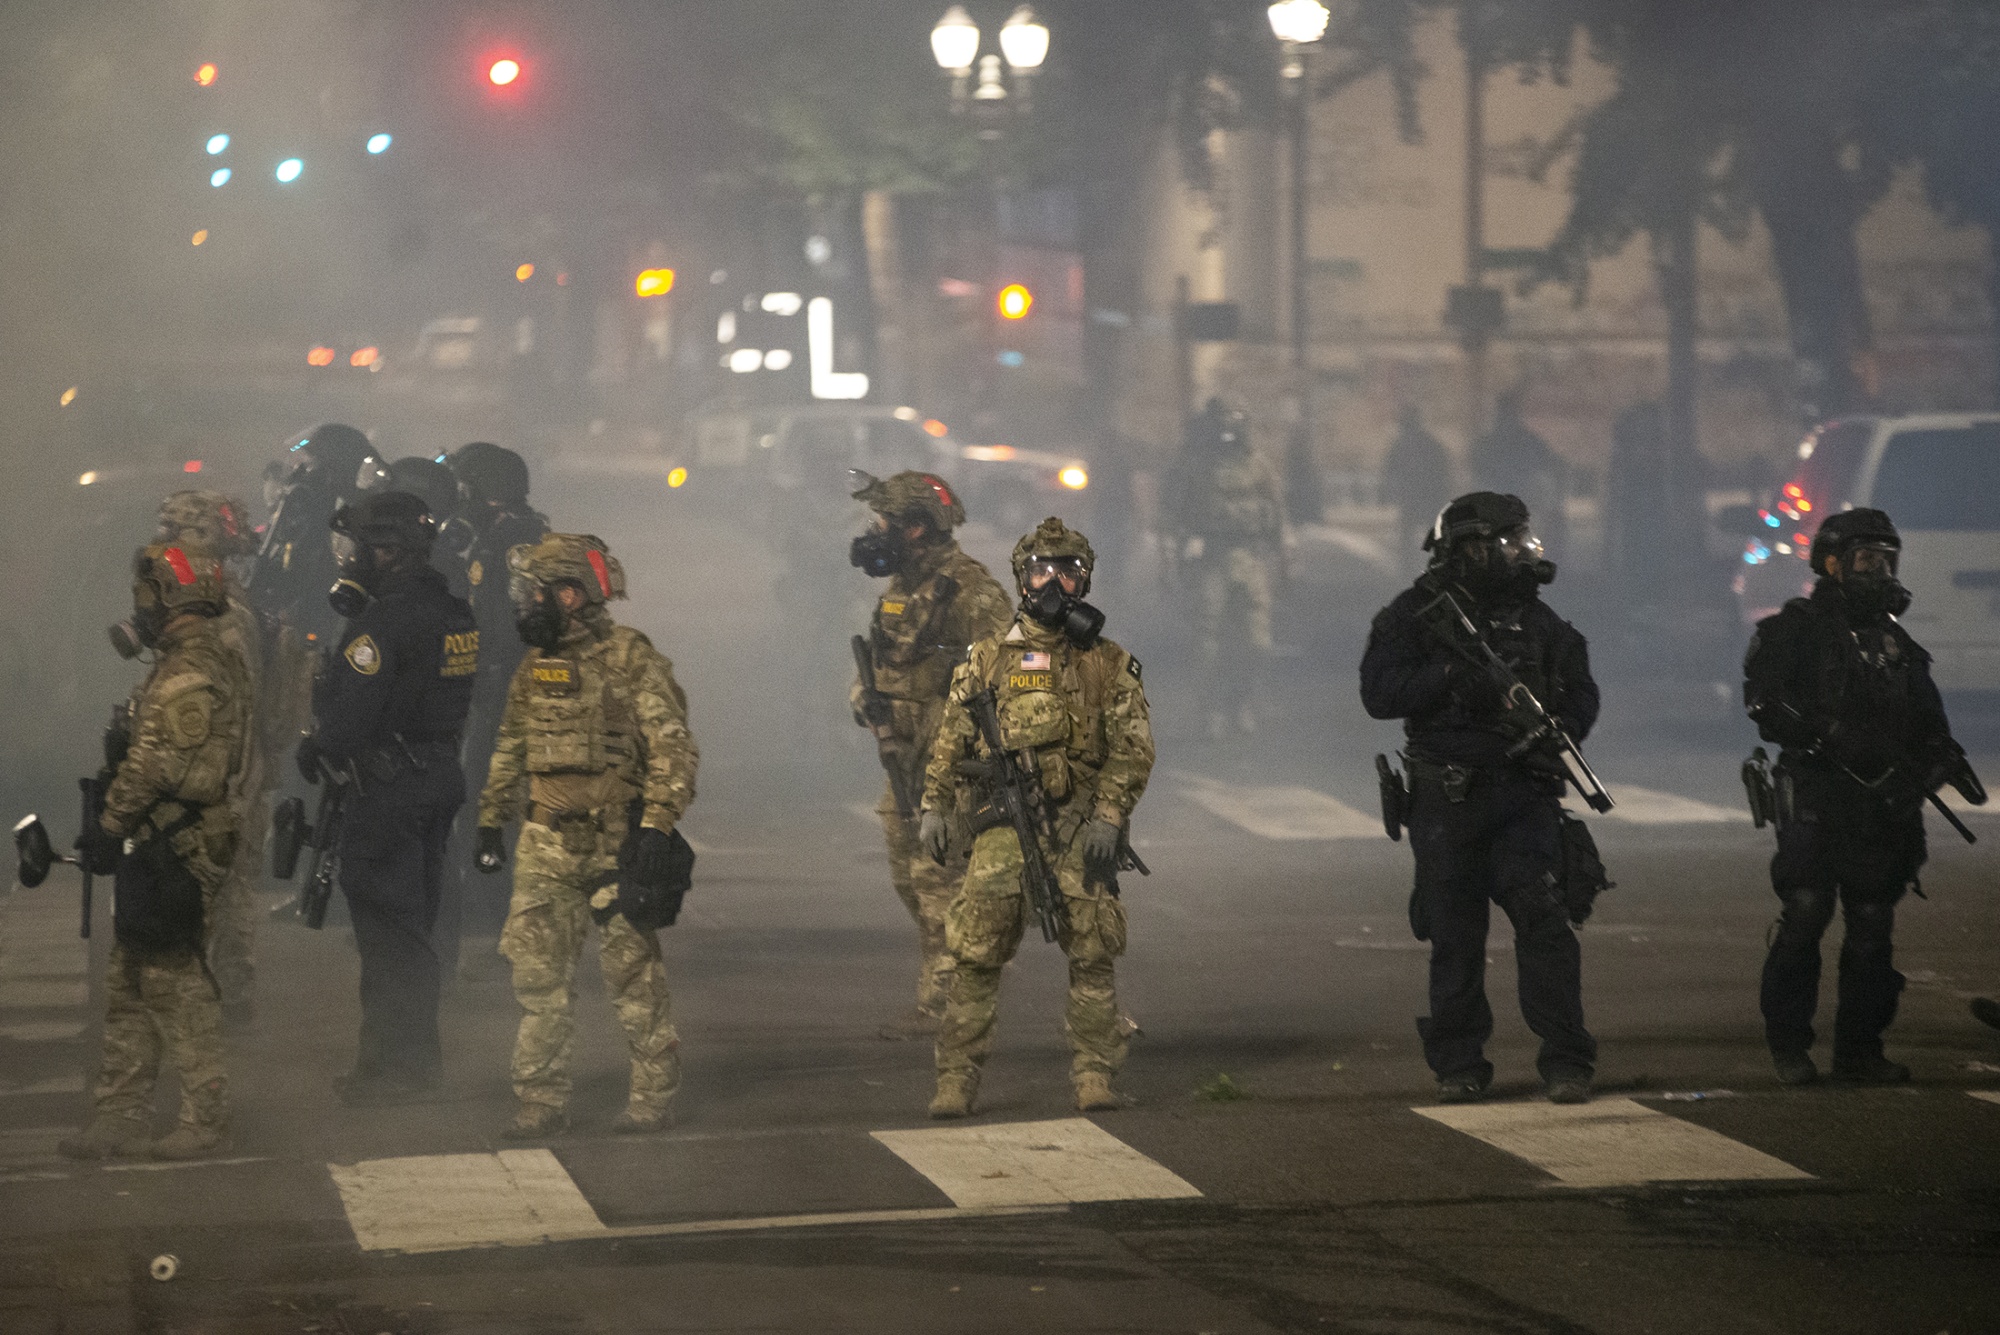 Federal police on Salmon Street after pushing protesters away from the Mark O. Hatfield U.S. Courthouse in Portland, Oregon, on July 21, 2020.